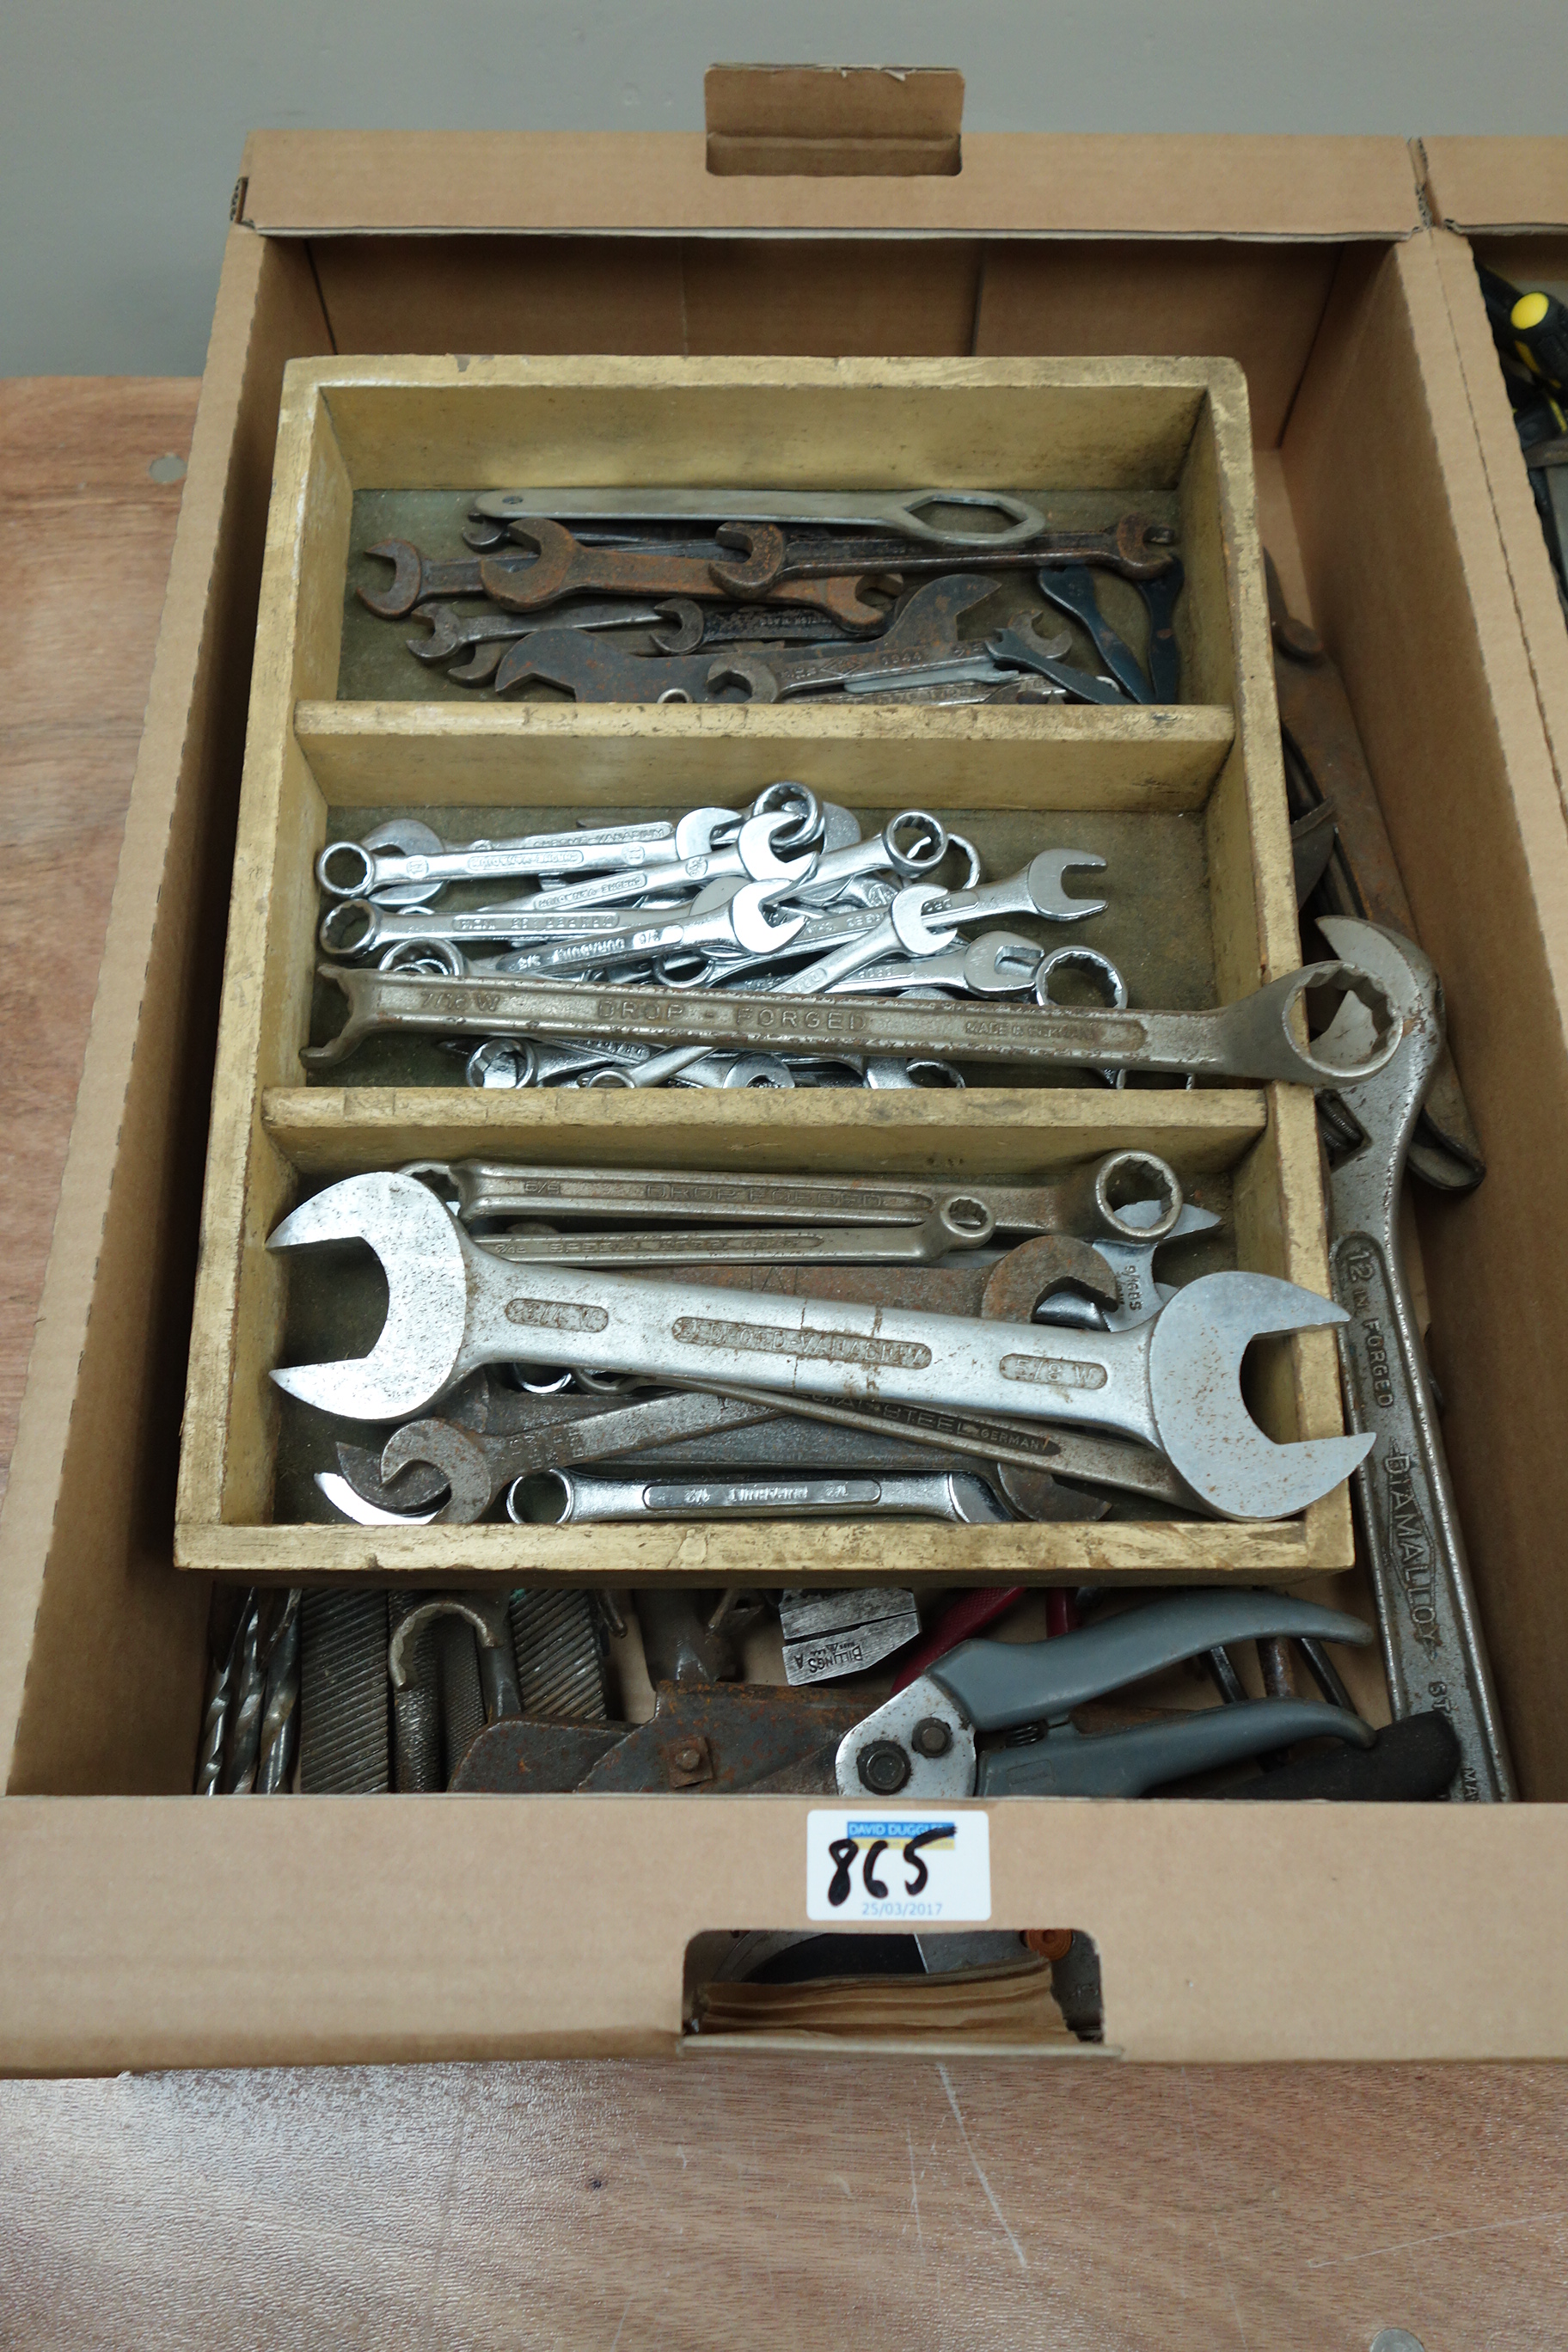 Quantity of various tools and accessories including - handsaws, chisels, hammers, planes, spanners, - Bild 2 aus 5